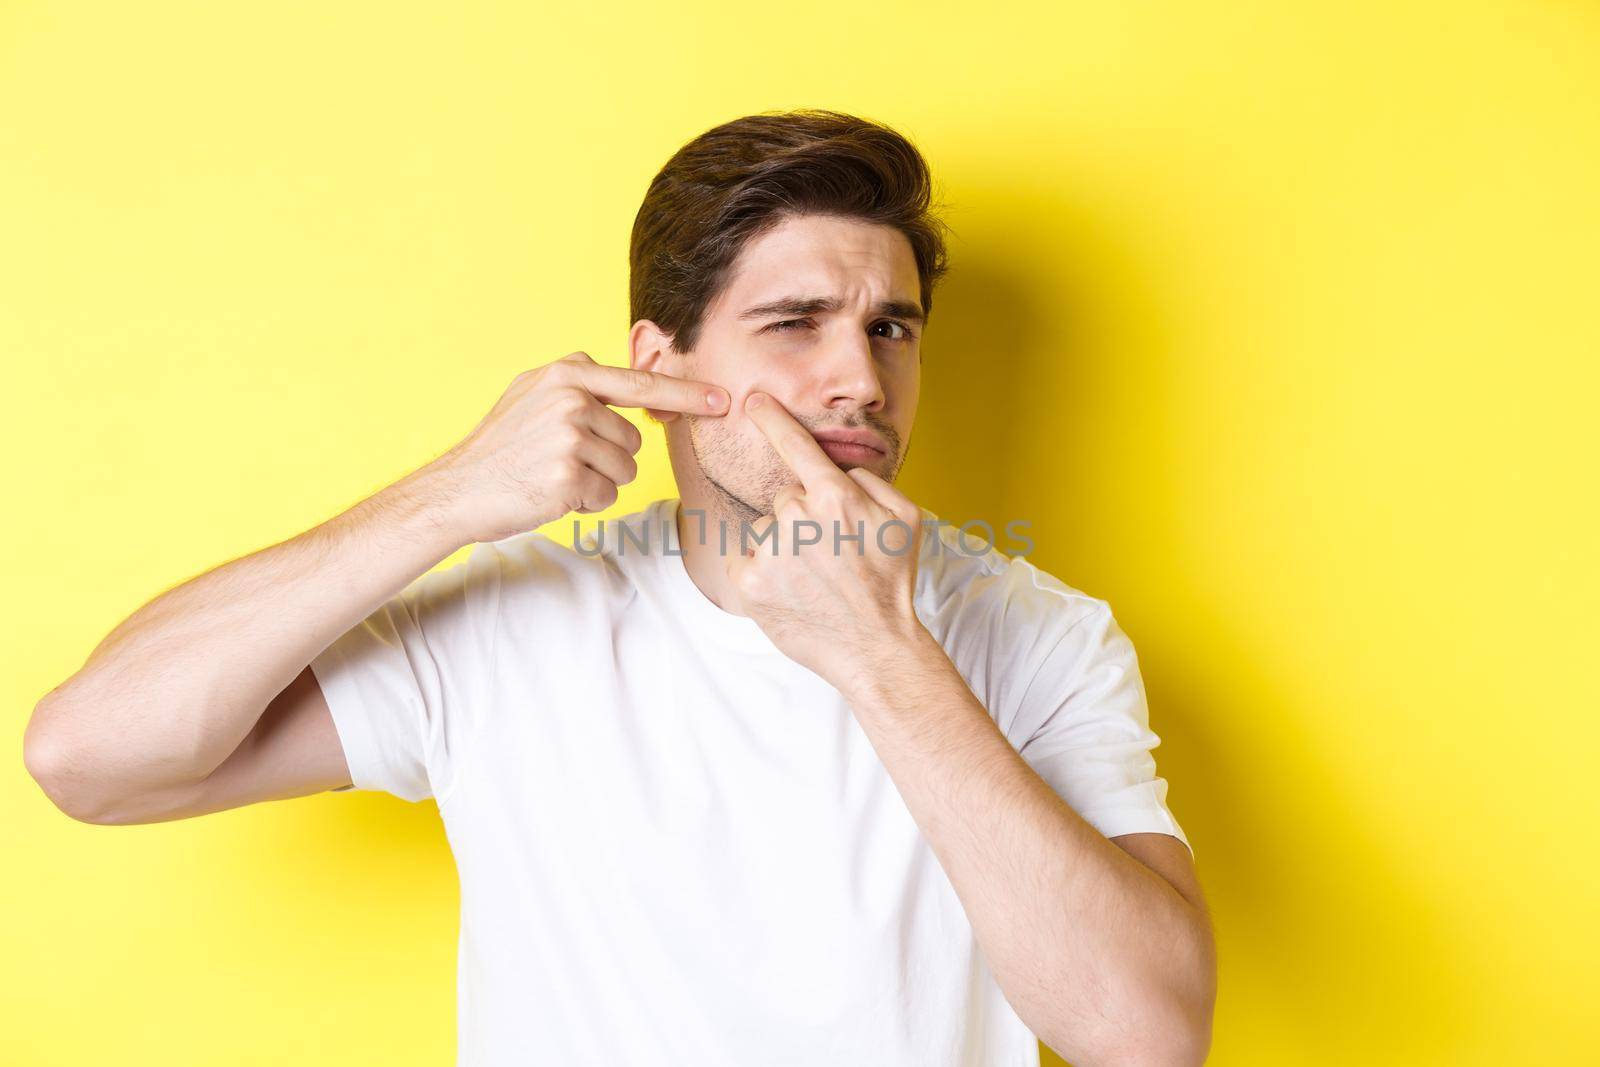 Young man pop a pimple on cheek, standing over yellow background. Concept of skin care and acne.